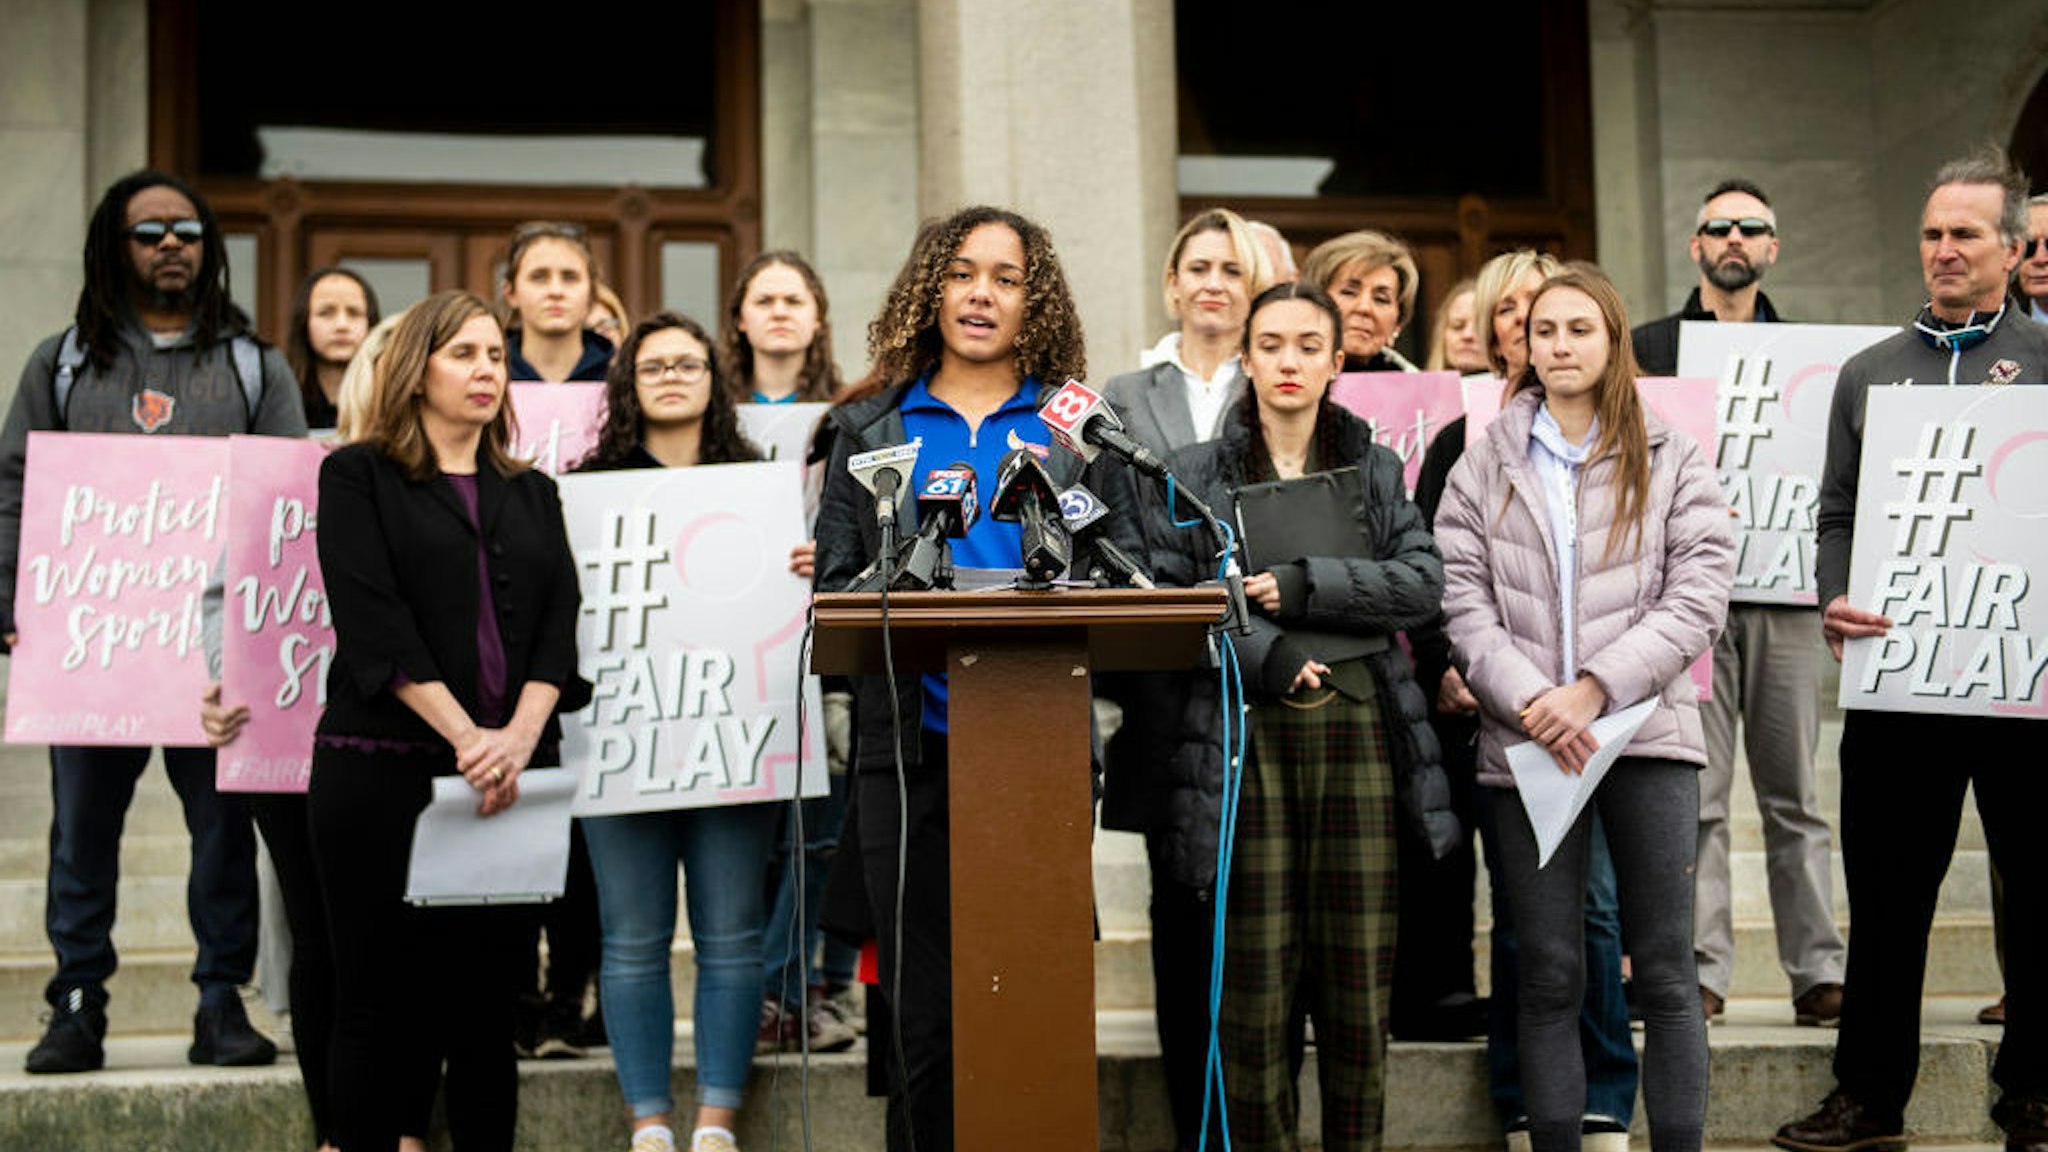 Danbury High School sophomore Alanna Smith speaks during a press conference at the Connecticut State Capitol Wednesday, Feb. 12, 2020, in downtown Hartford, Conn. The families of high school athletes Selina Soule, Alanna Smith and Chelsea Mitchell have filed a federal lawsuit against the Connecticut Association of Schools and multiple school districts alleging discrimination. The athletes say they lost out on top finishes and possible scholarship opportunities because a statewide policy allows transgender athletes to compete against cisgender girls. (Kassi Jackson/Hartford Courant/TNS)